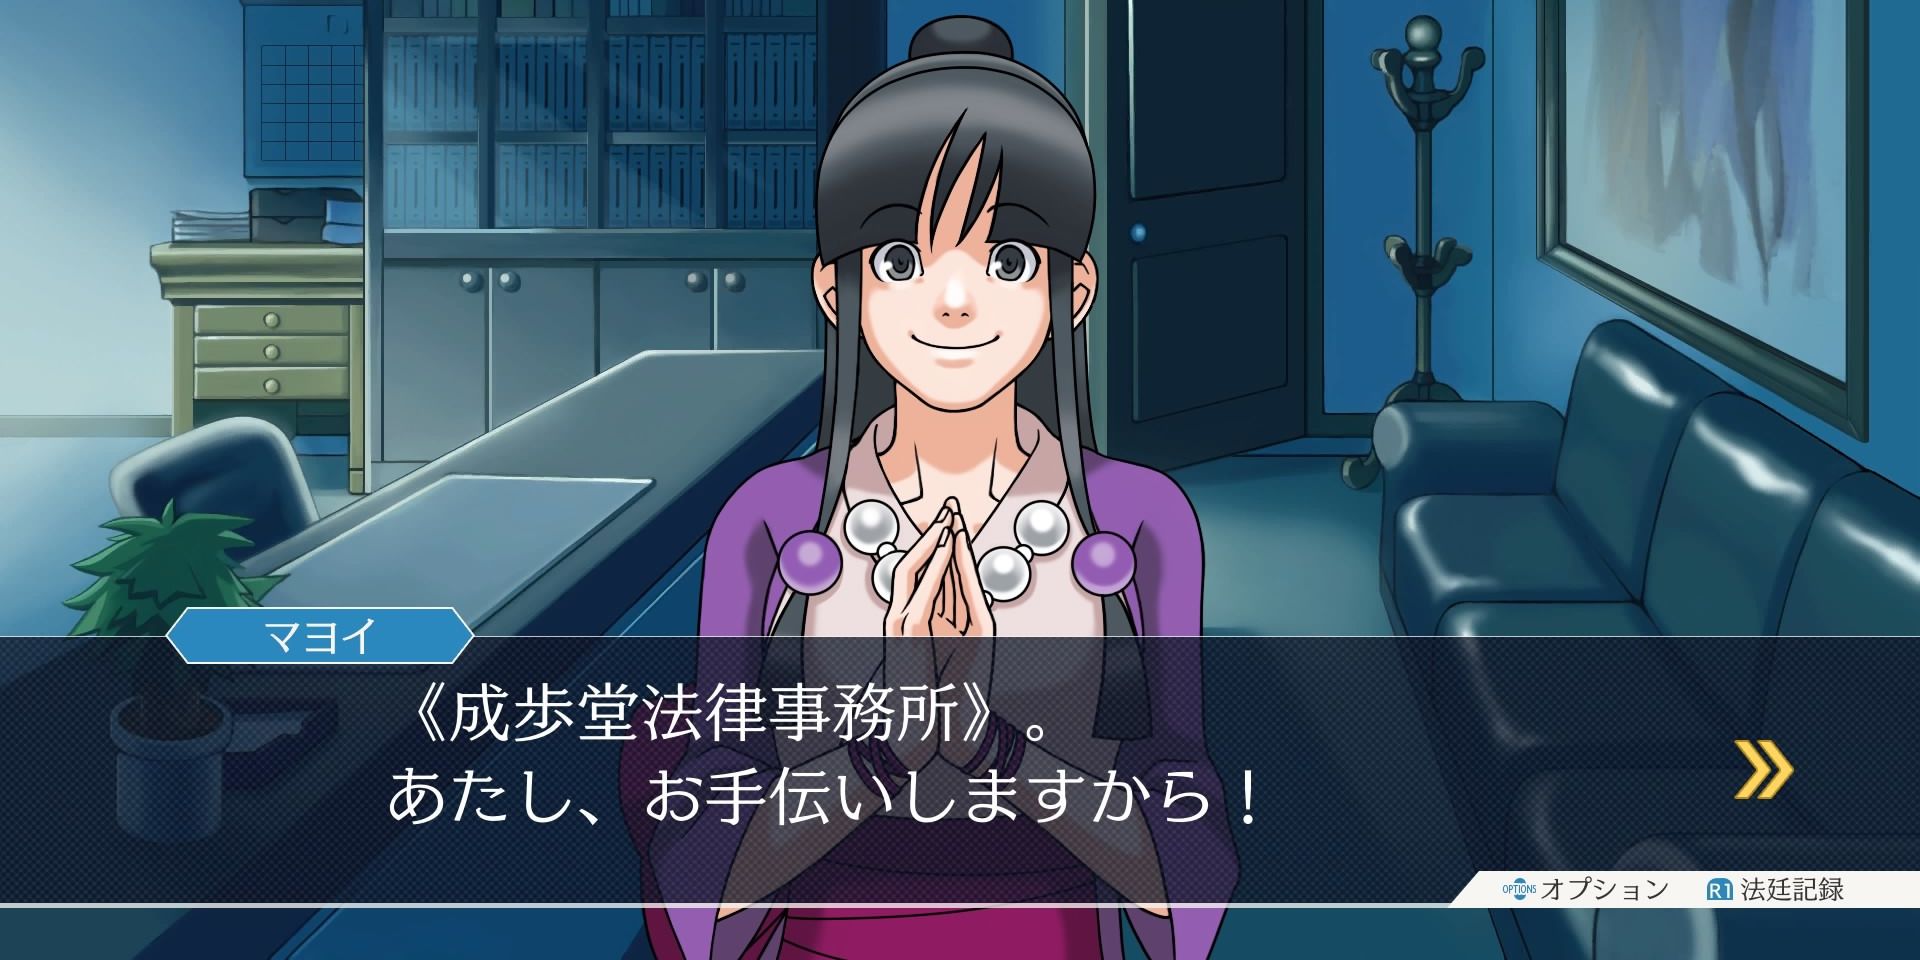 Maya Fey looking excited in Ace Attorney.